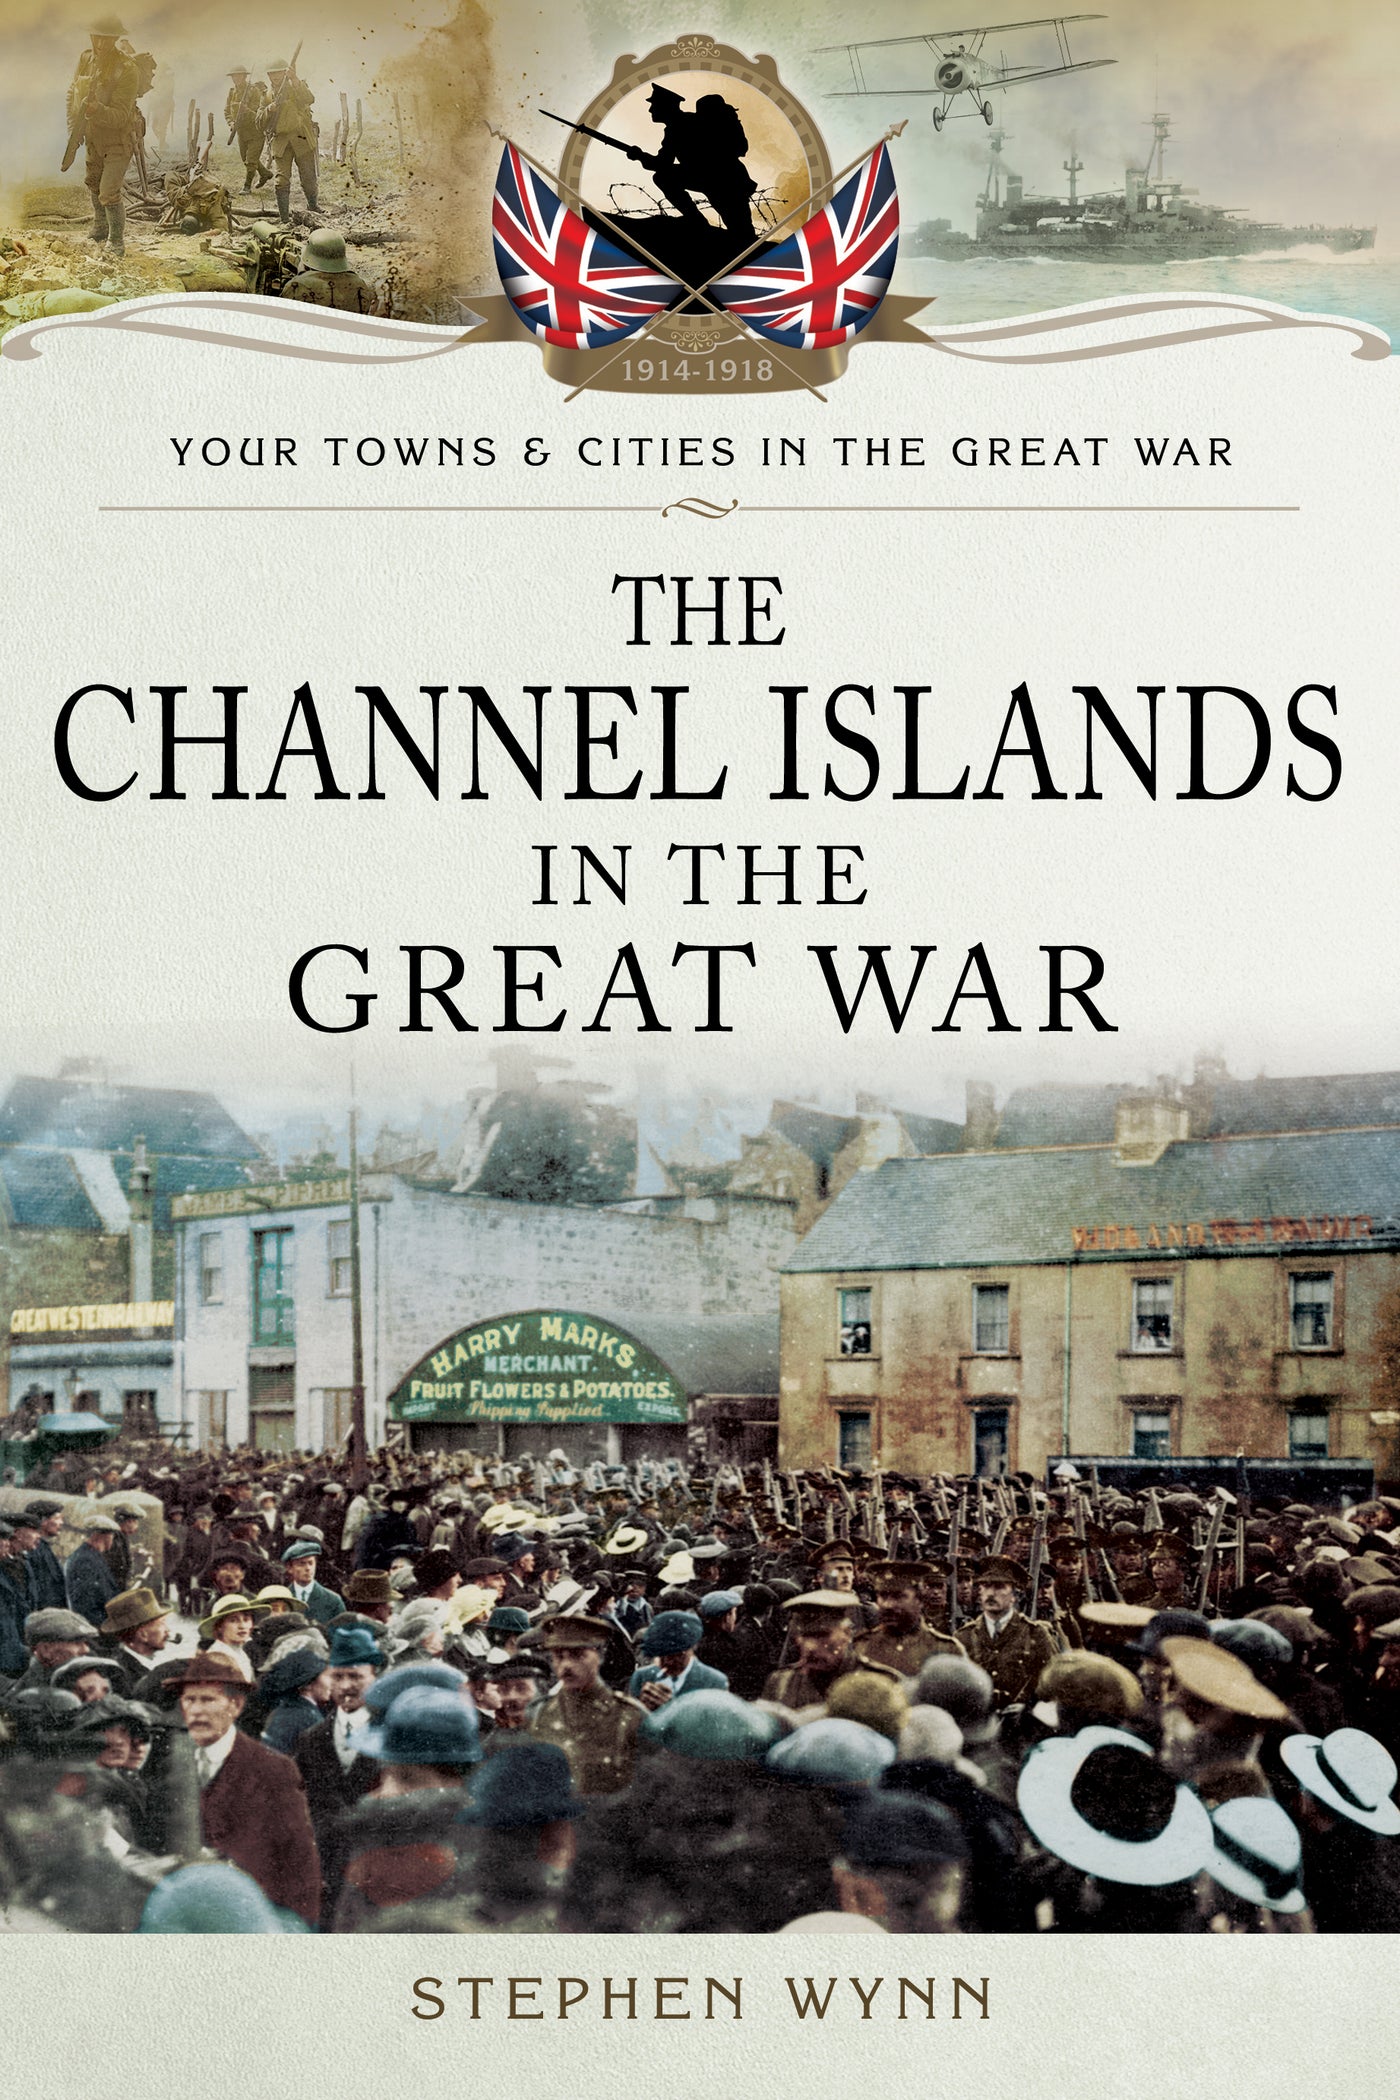 The Channel Islands in the Great War